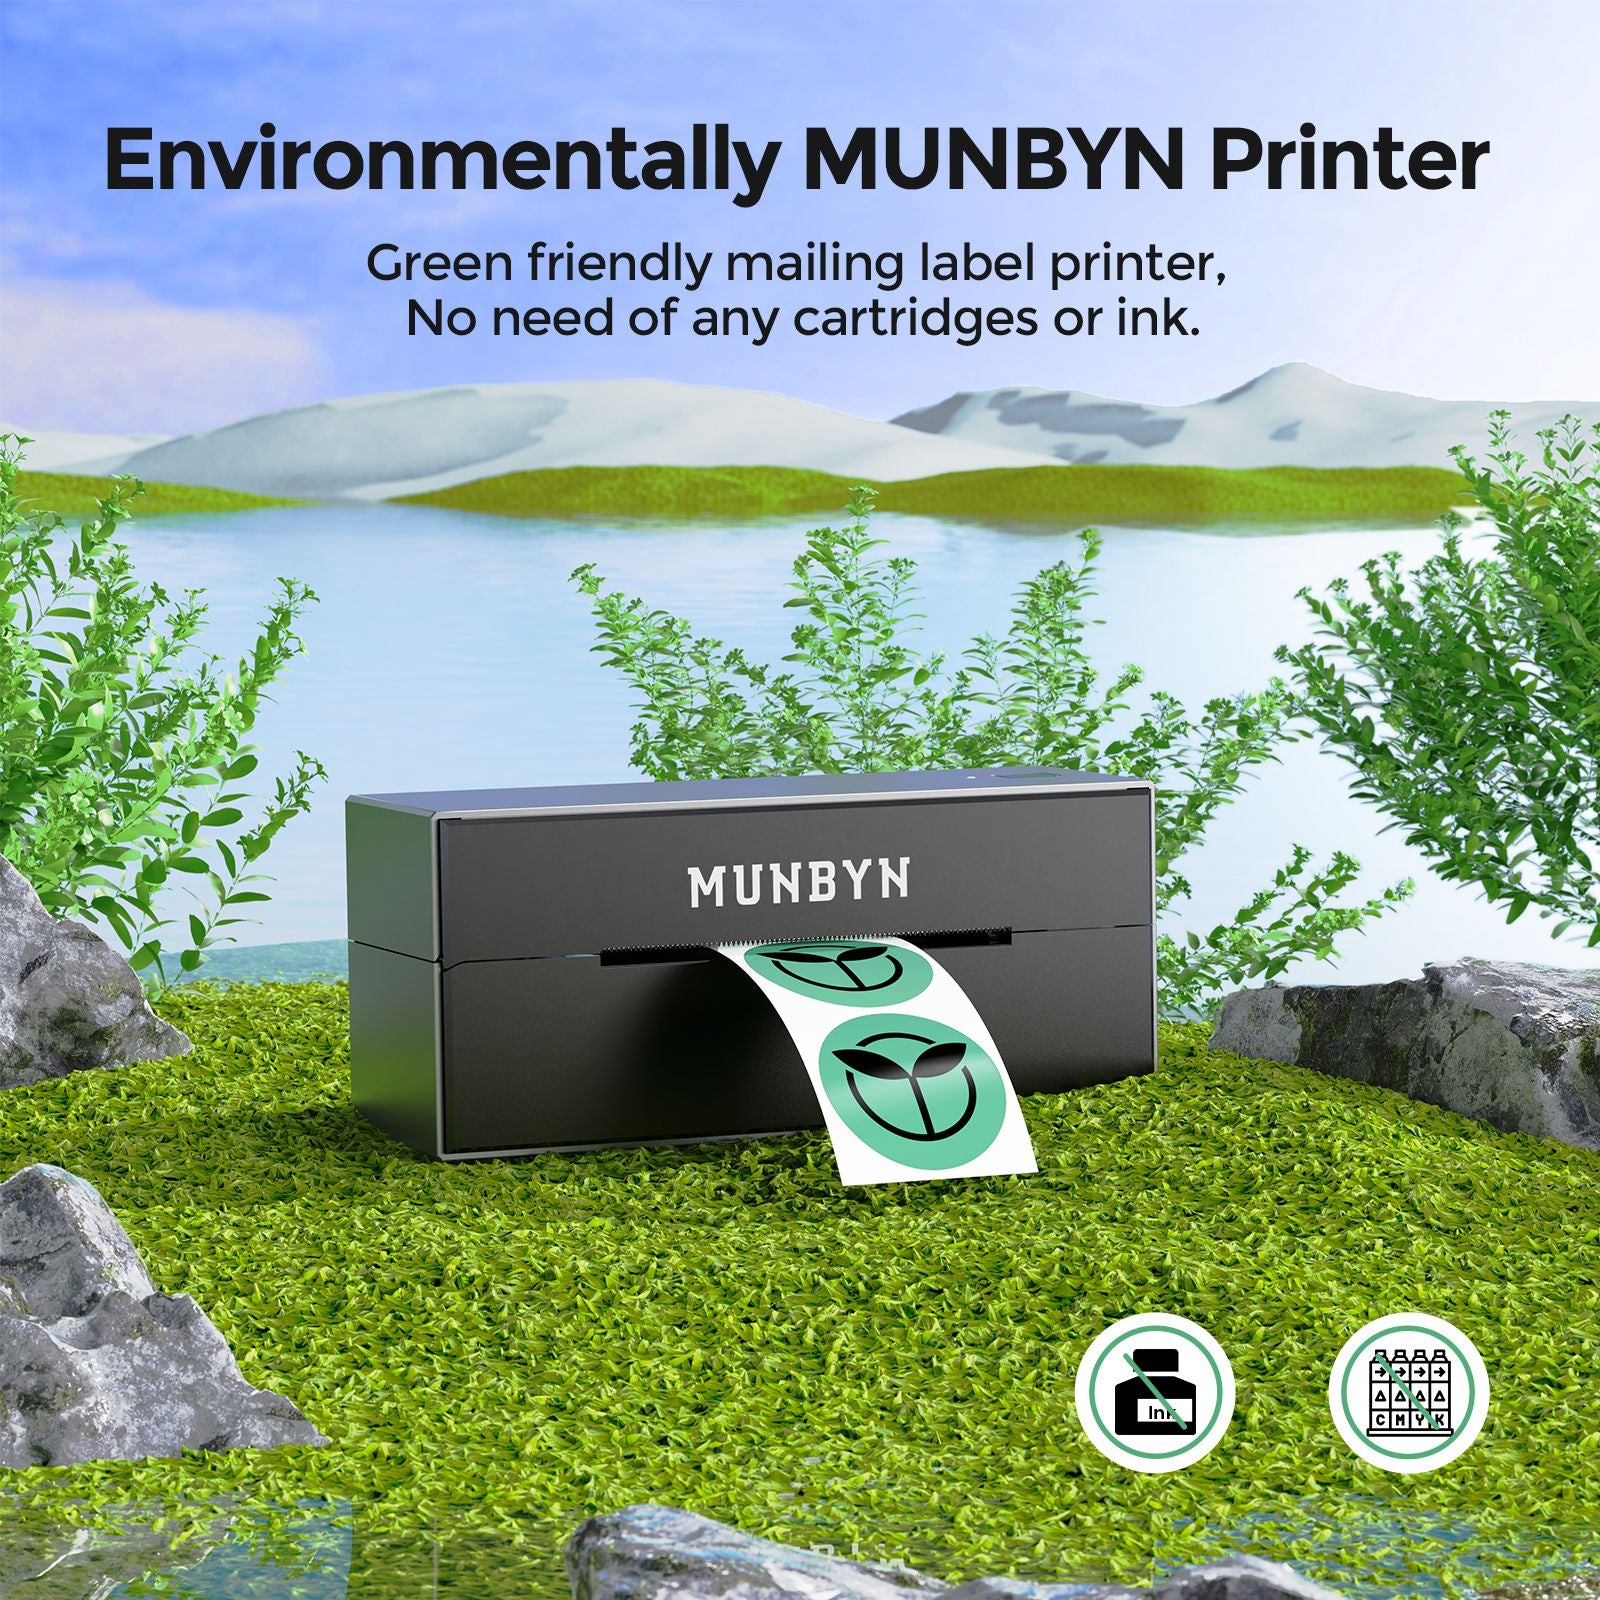 Munbyn postage label printer P129 is environmentally friendly as it is compatible with recyclable thermal labels, making it a sustainable choice for businesses that want to reduce their carbon footprint.